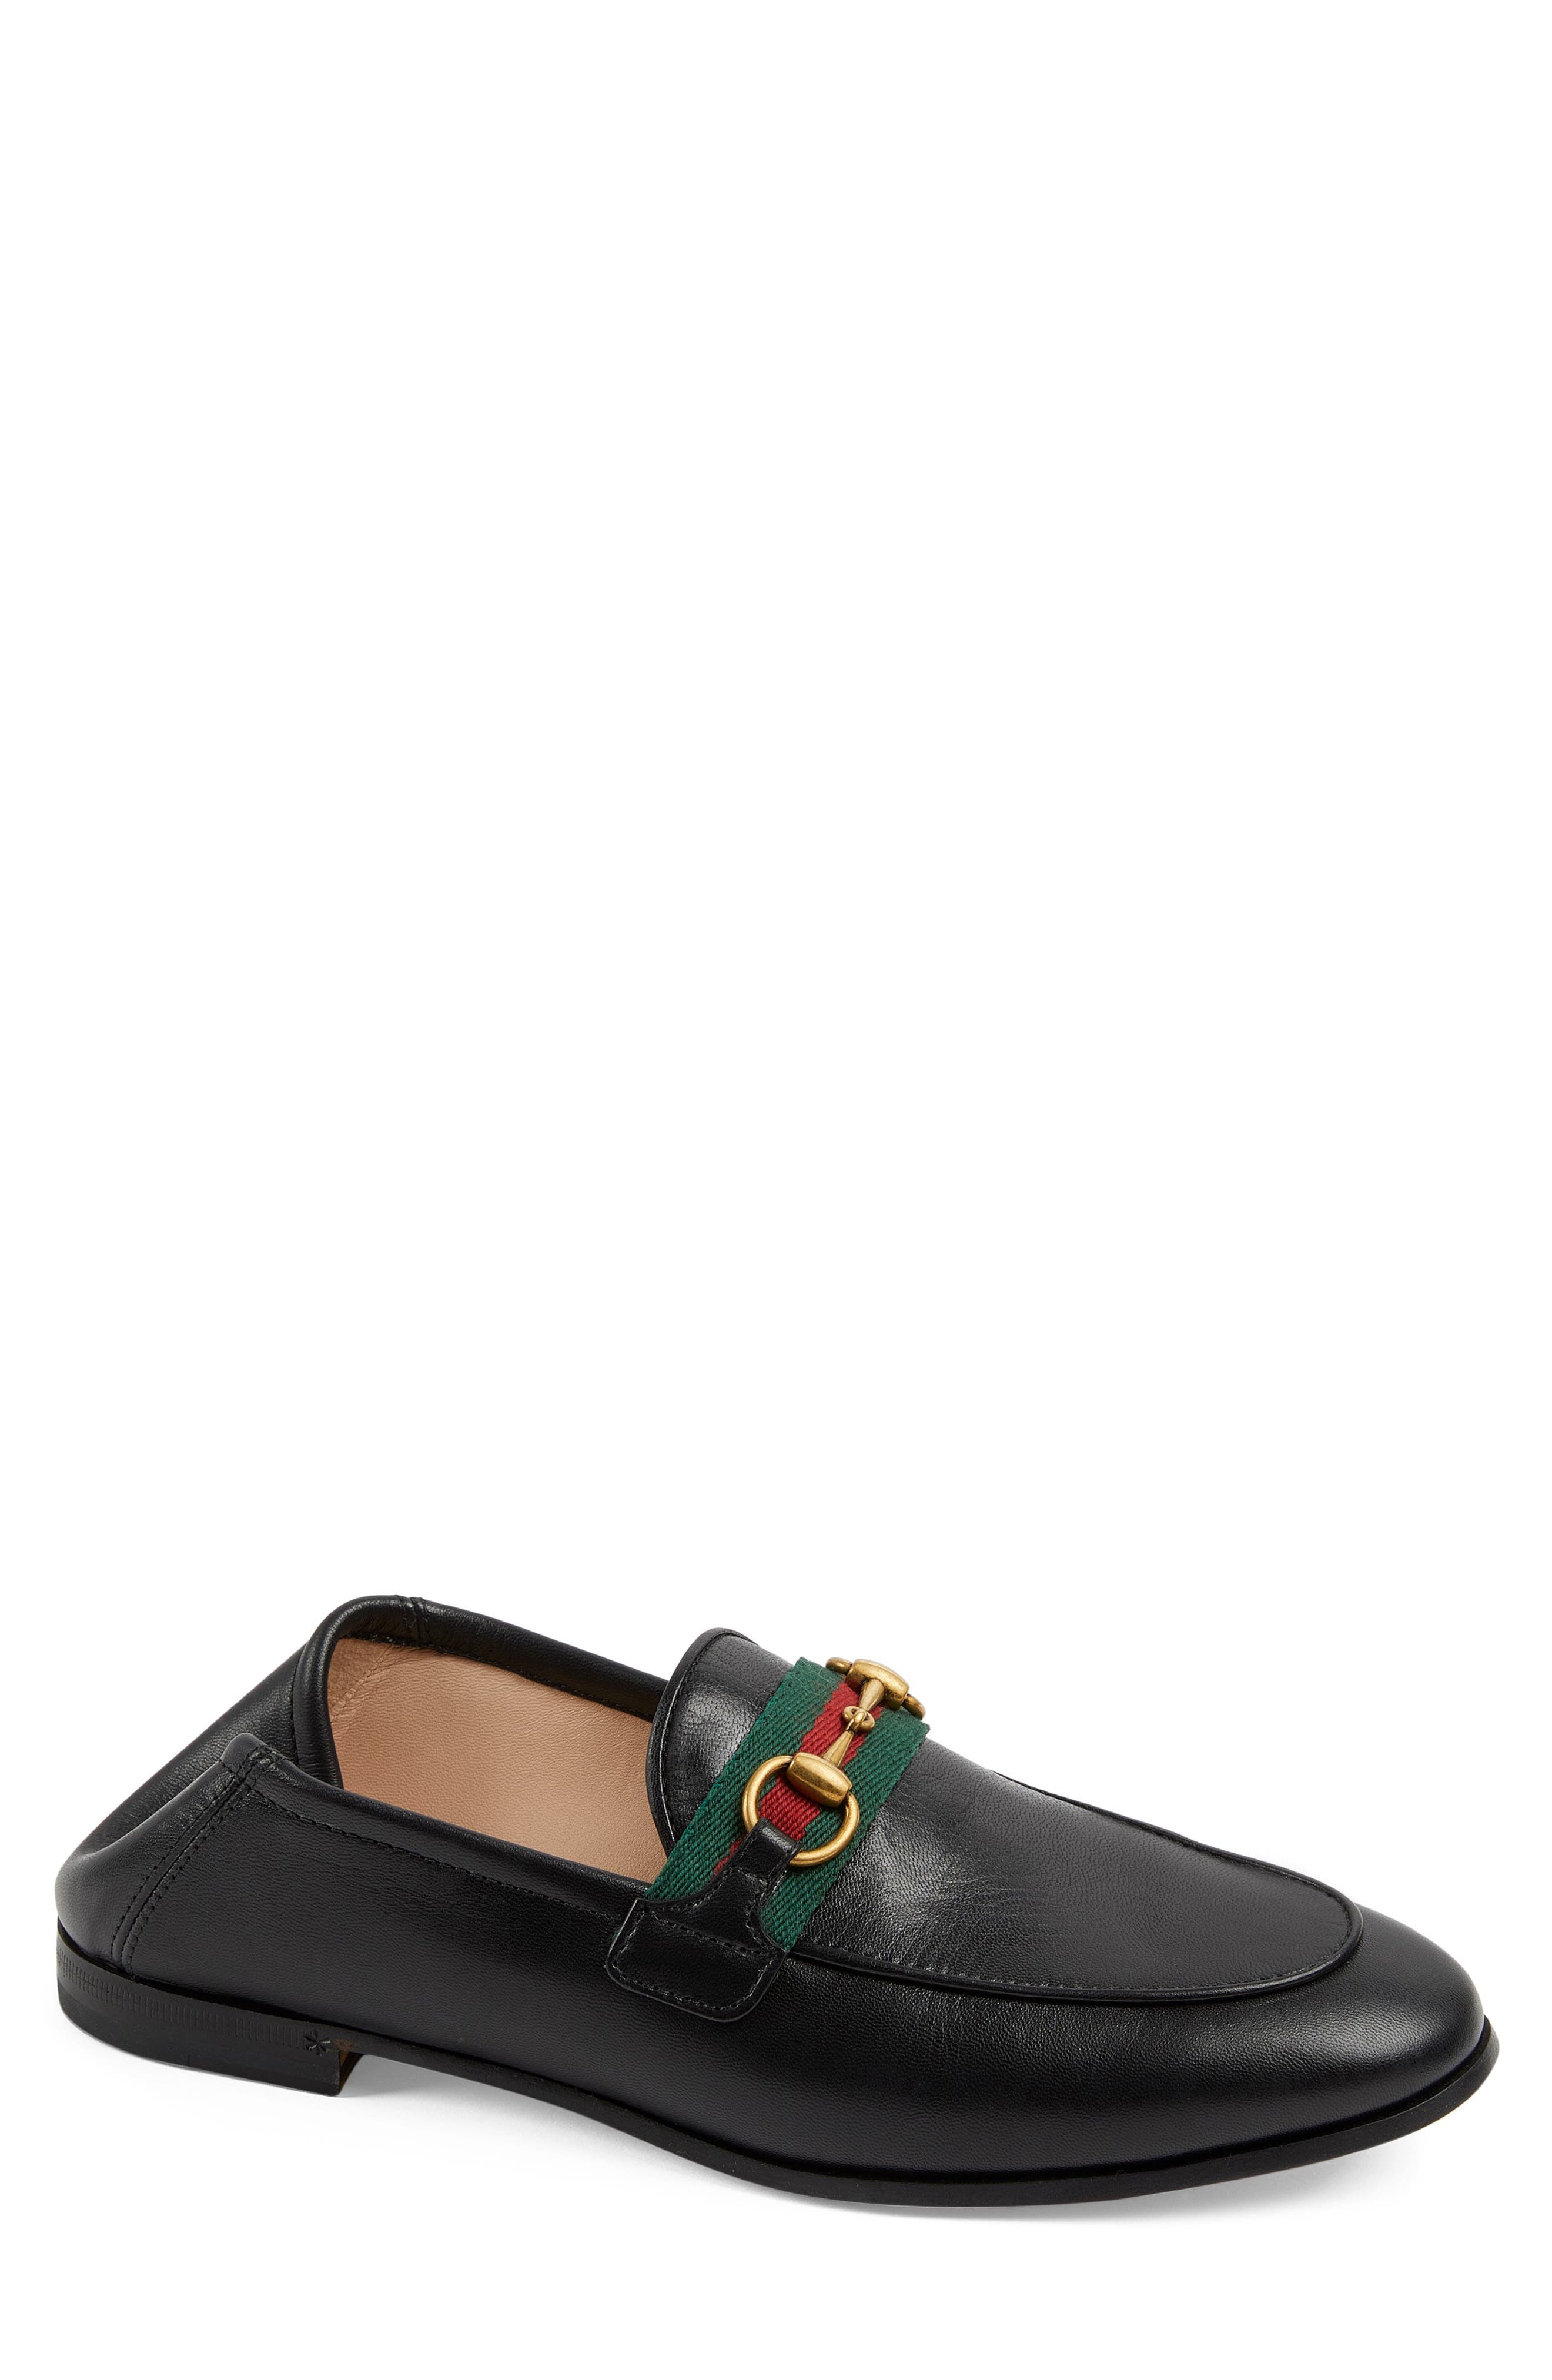 gucci web loafers